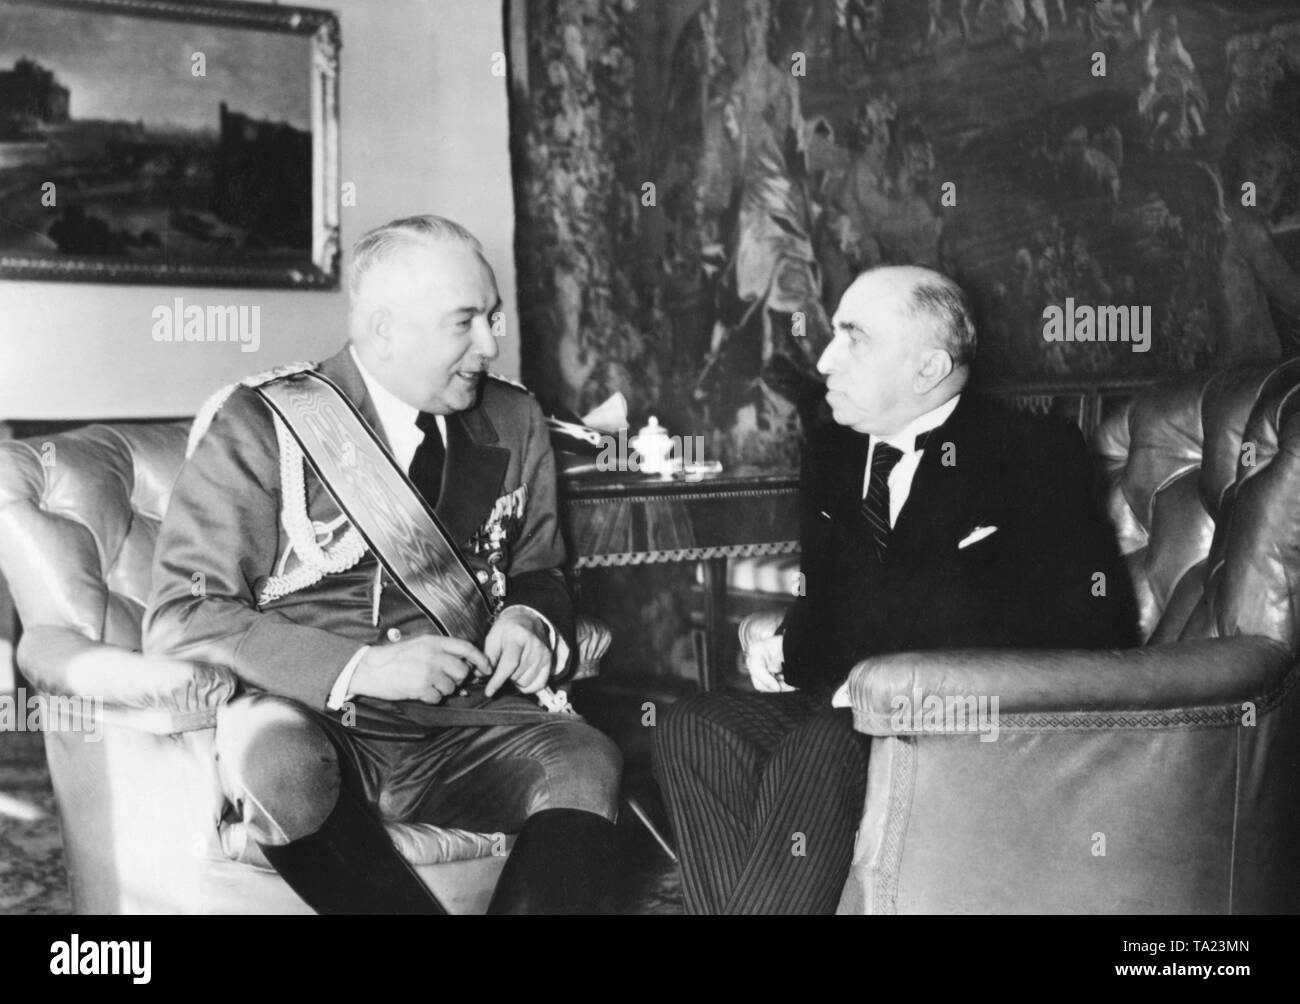 Meeting of Reich Protector of Bohemia and Moravia Konstantin von Neurath and Czech President Emil Hacha. Despite the establishment of the Protectorate of Bohemia and Moravia, Hacha formally remains head of state of Bohemia and Moravia. Stock Photo